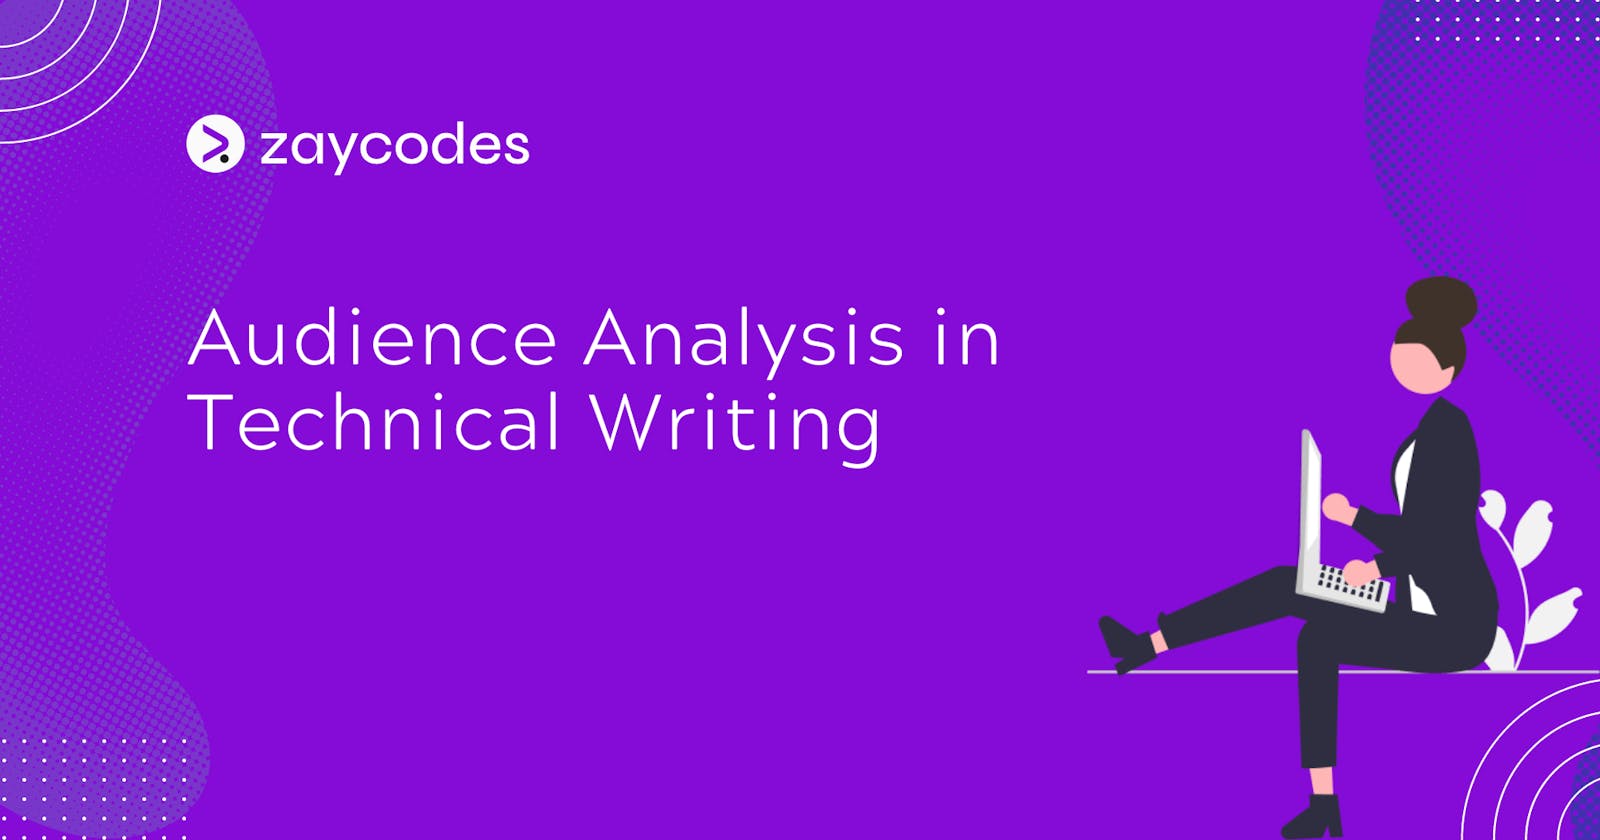 Audience Analysis in Technical Writing